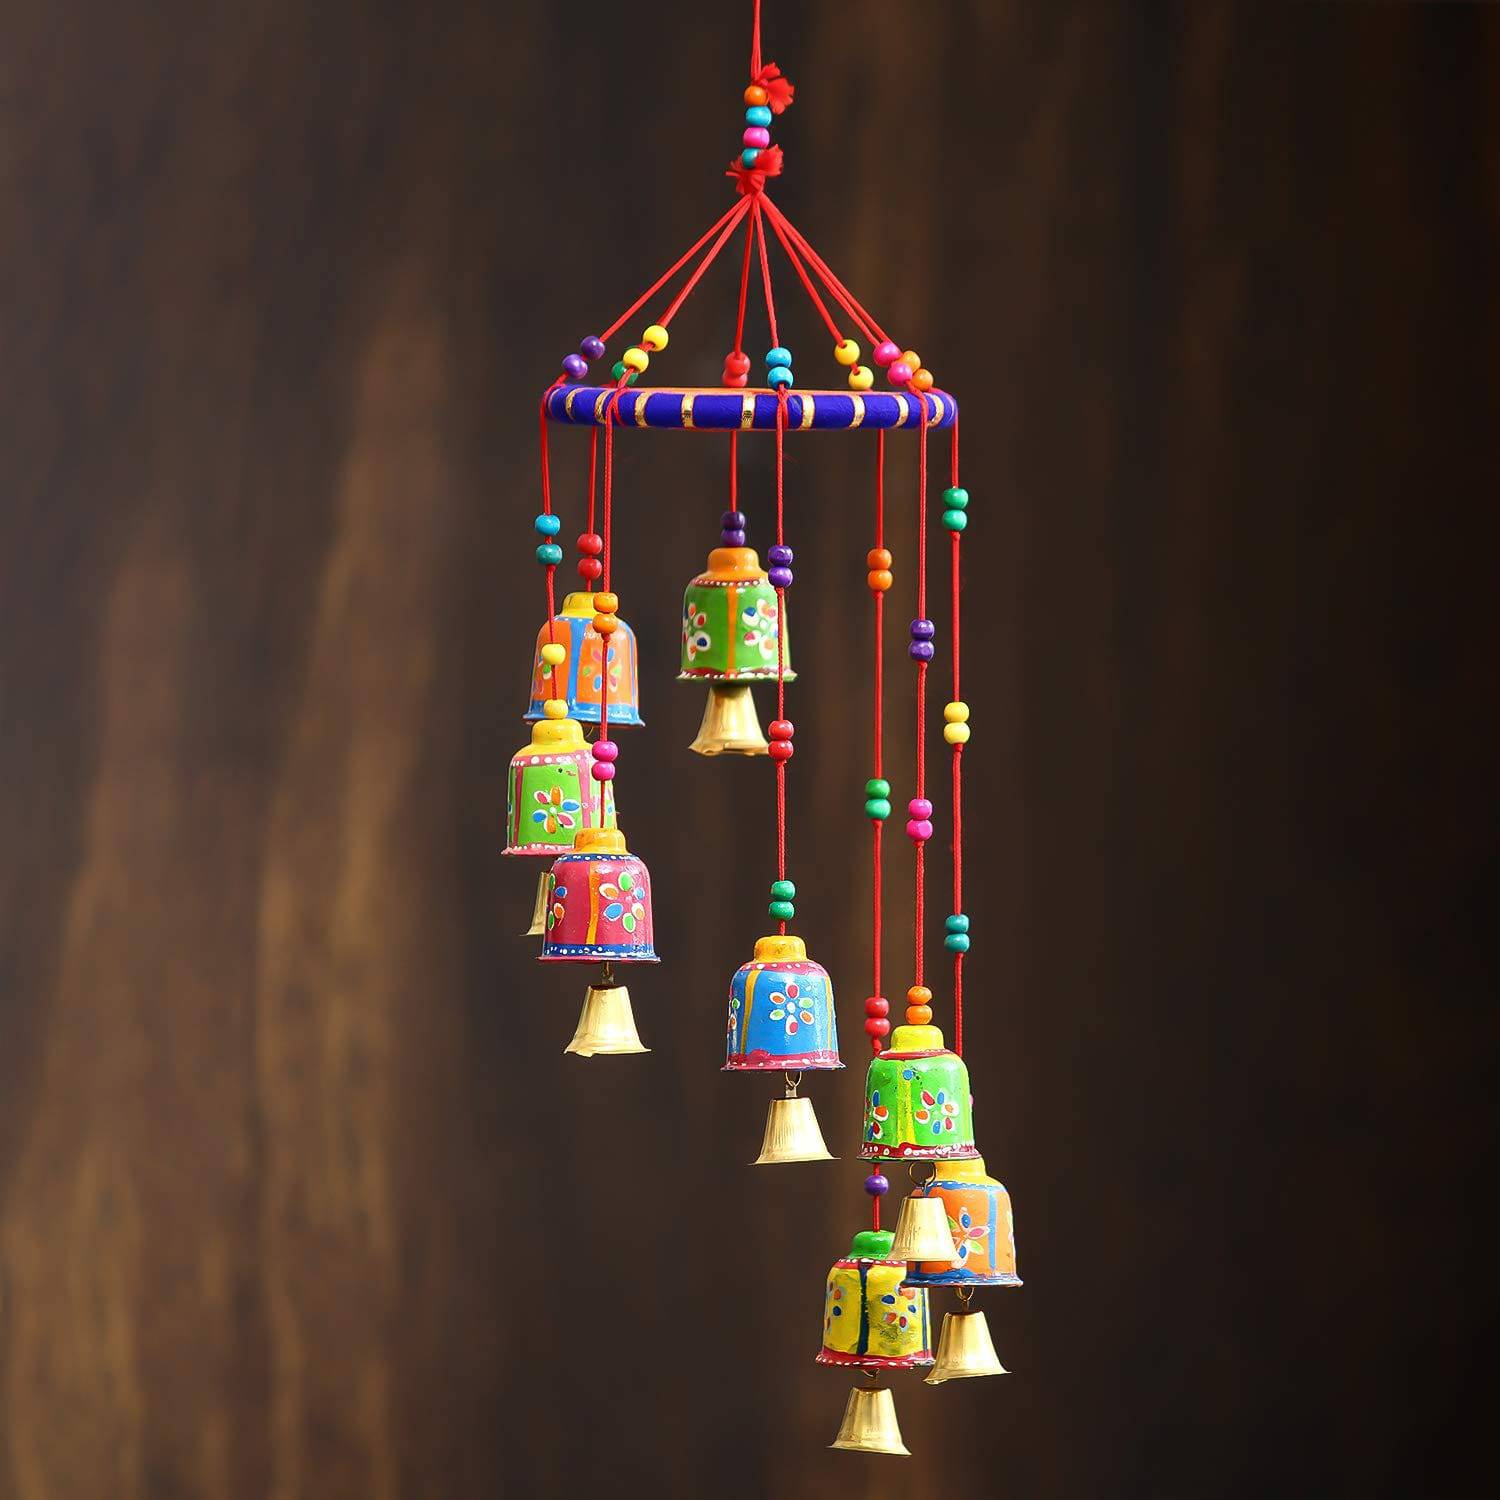 handicrafted Decorative Wall/Door/Window Hanging Bells Wind Chimes Showpiece for Home Decor, Wall Decor, Pooja Room Temple, Diwali Gift, Corporate Gift - YuvaFlowers